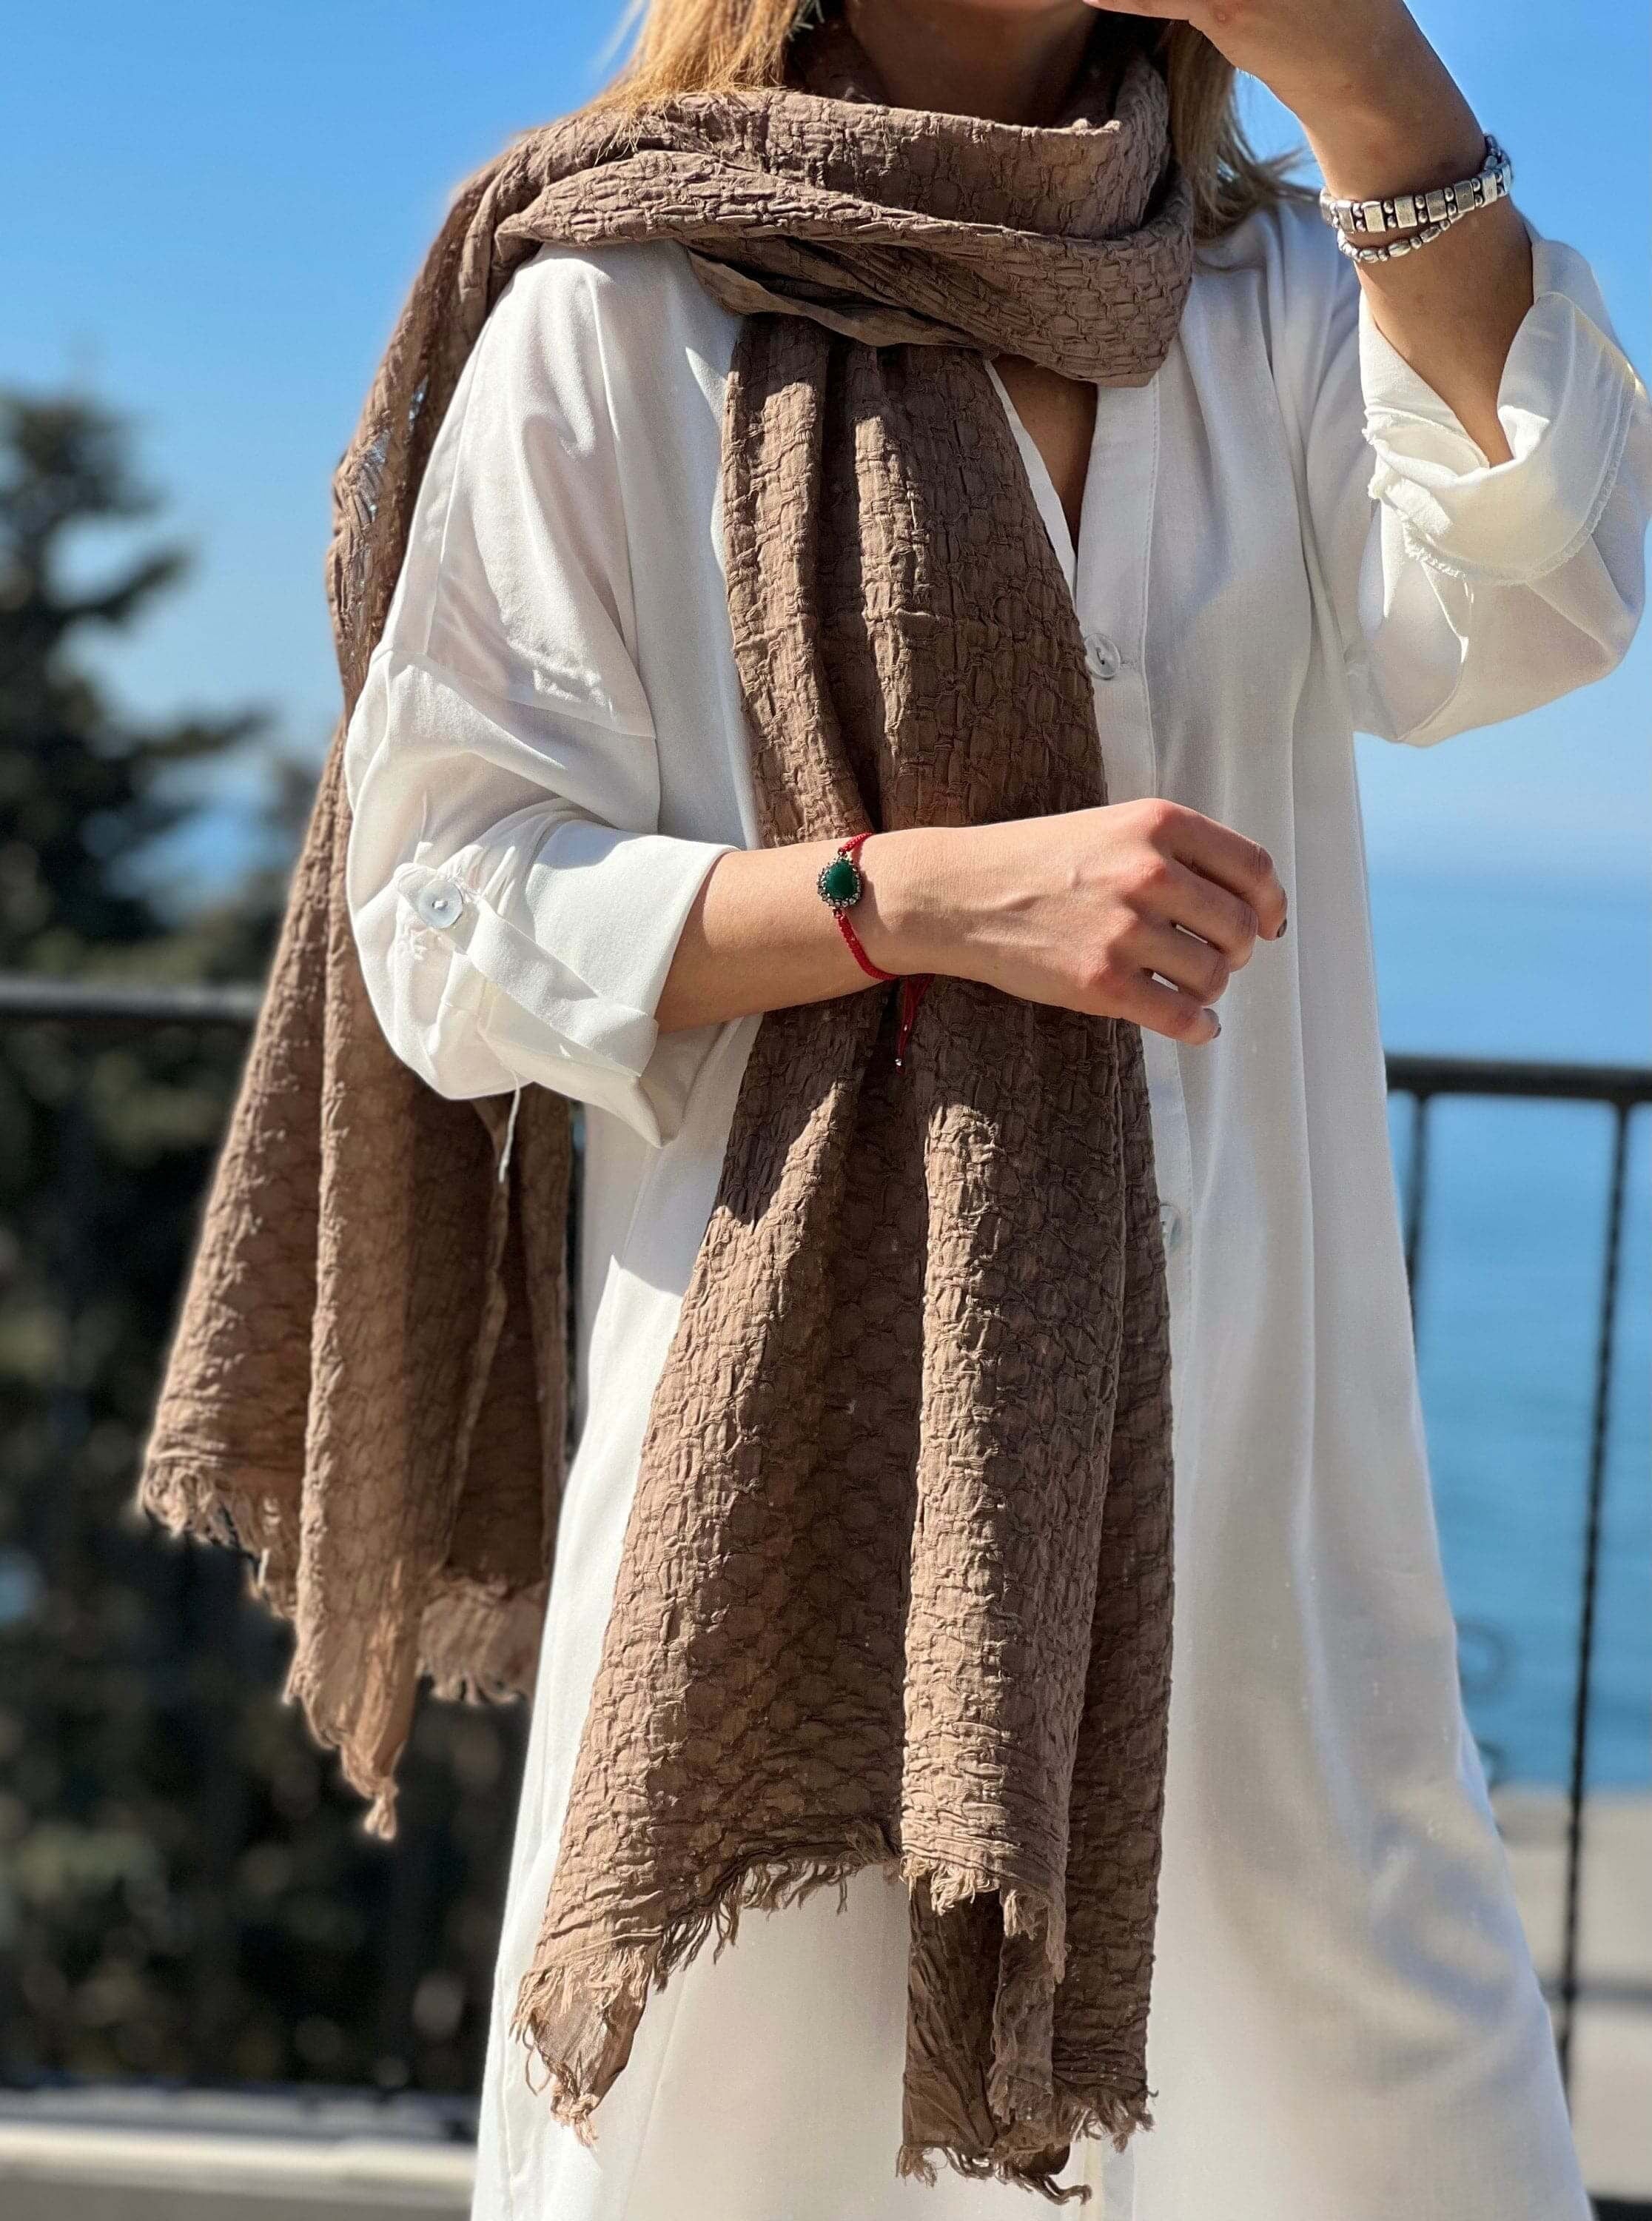 Most times, to add more elegance and style to a monochromatic outfit, a scarf is the critical factor. A scarf is an accessory that can make a casual outfit look classy and elegant.